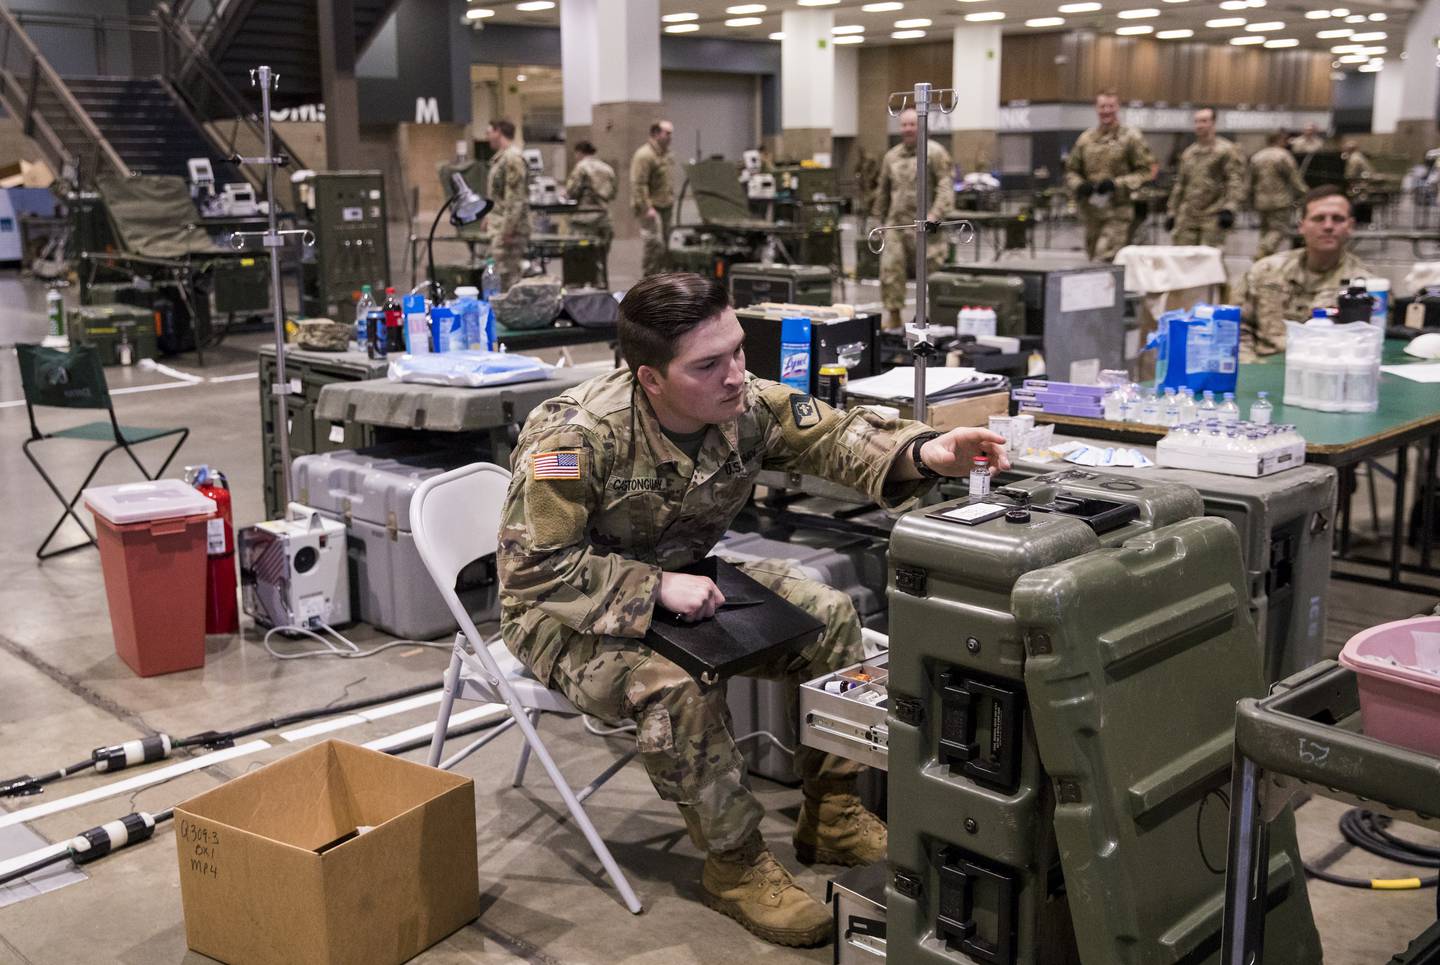 A look inside the Army field hospital at CenturyLink Field, designed to help medical centers swamped by coronavirus patients